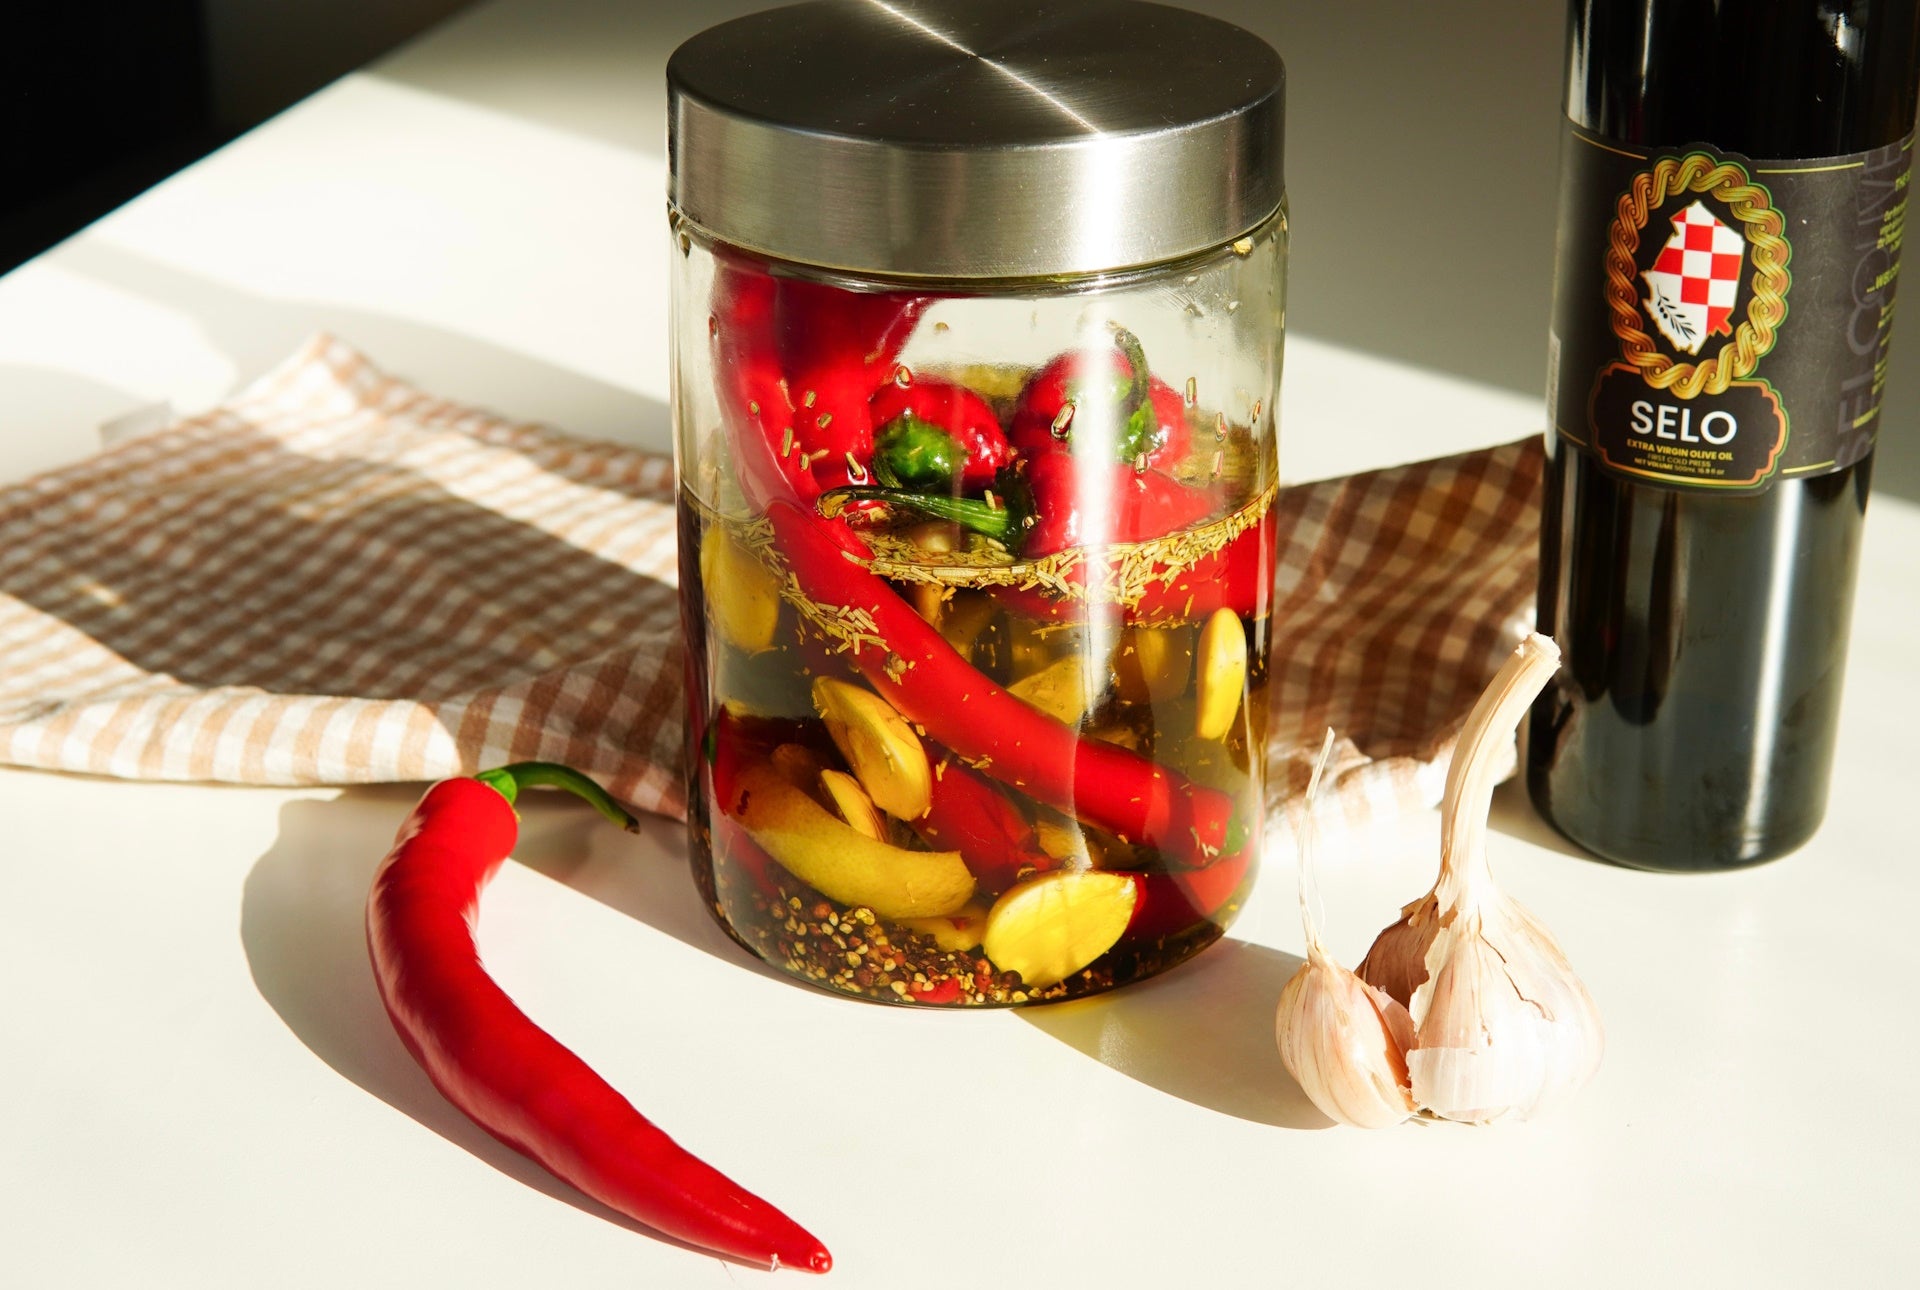 A jar of garlic and pepper-infused Selo Croatian olive oil, a flavorful culinary delight.